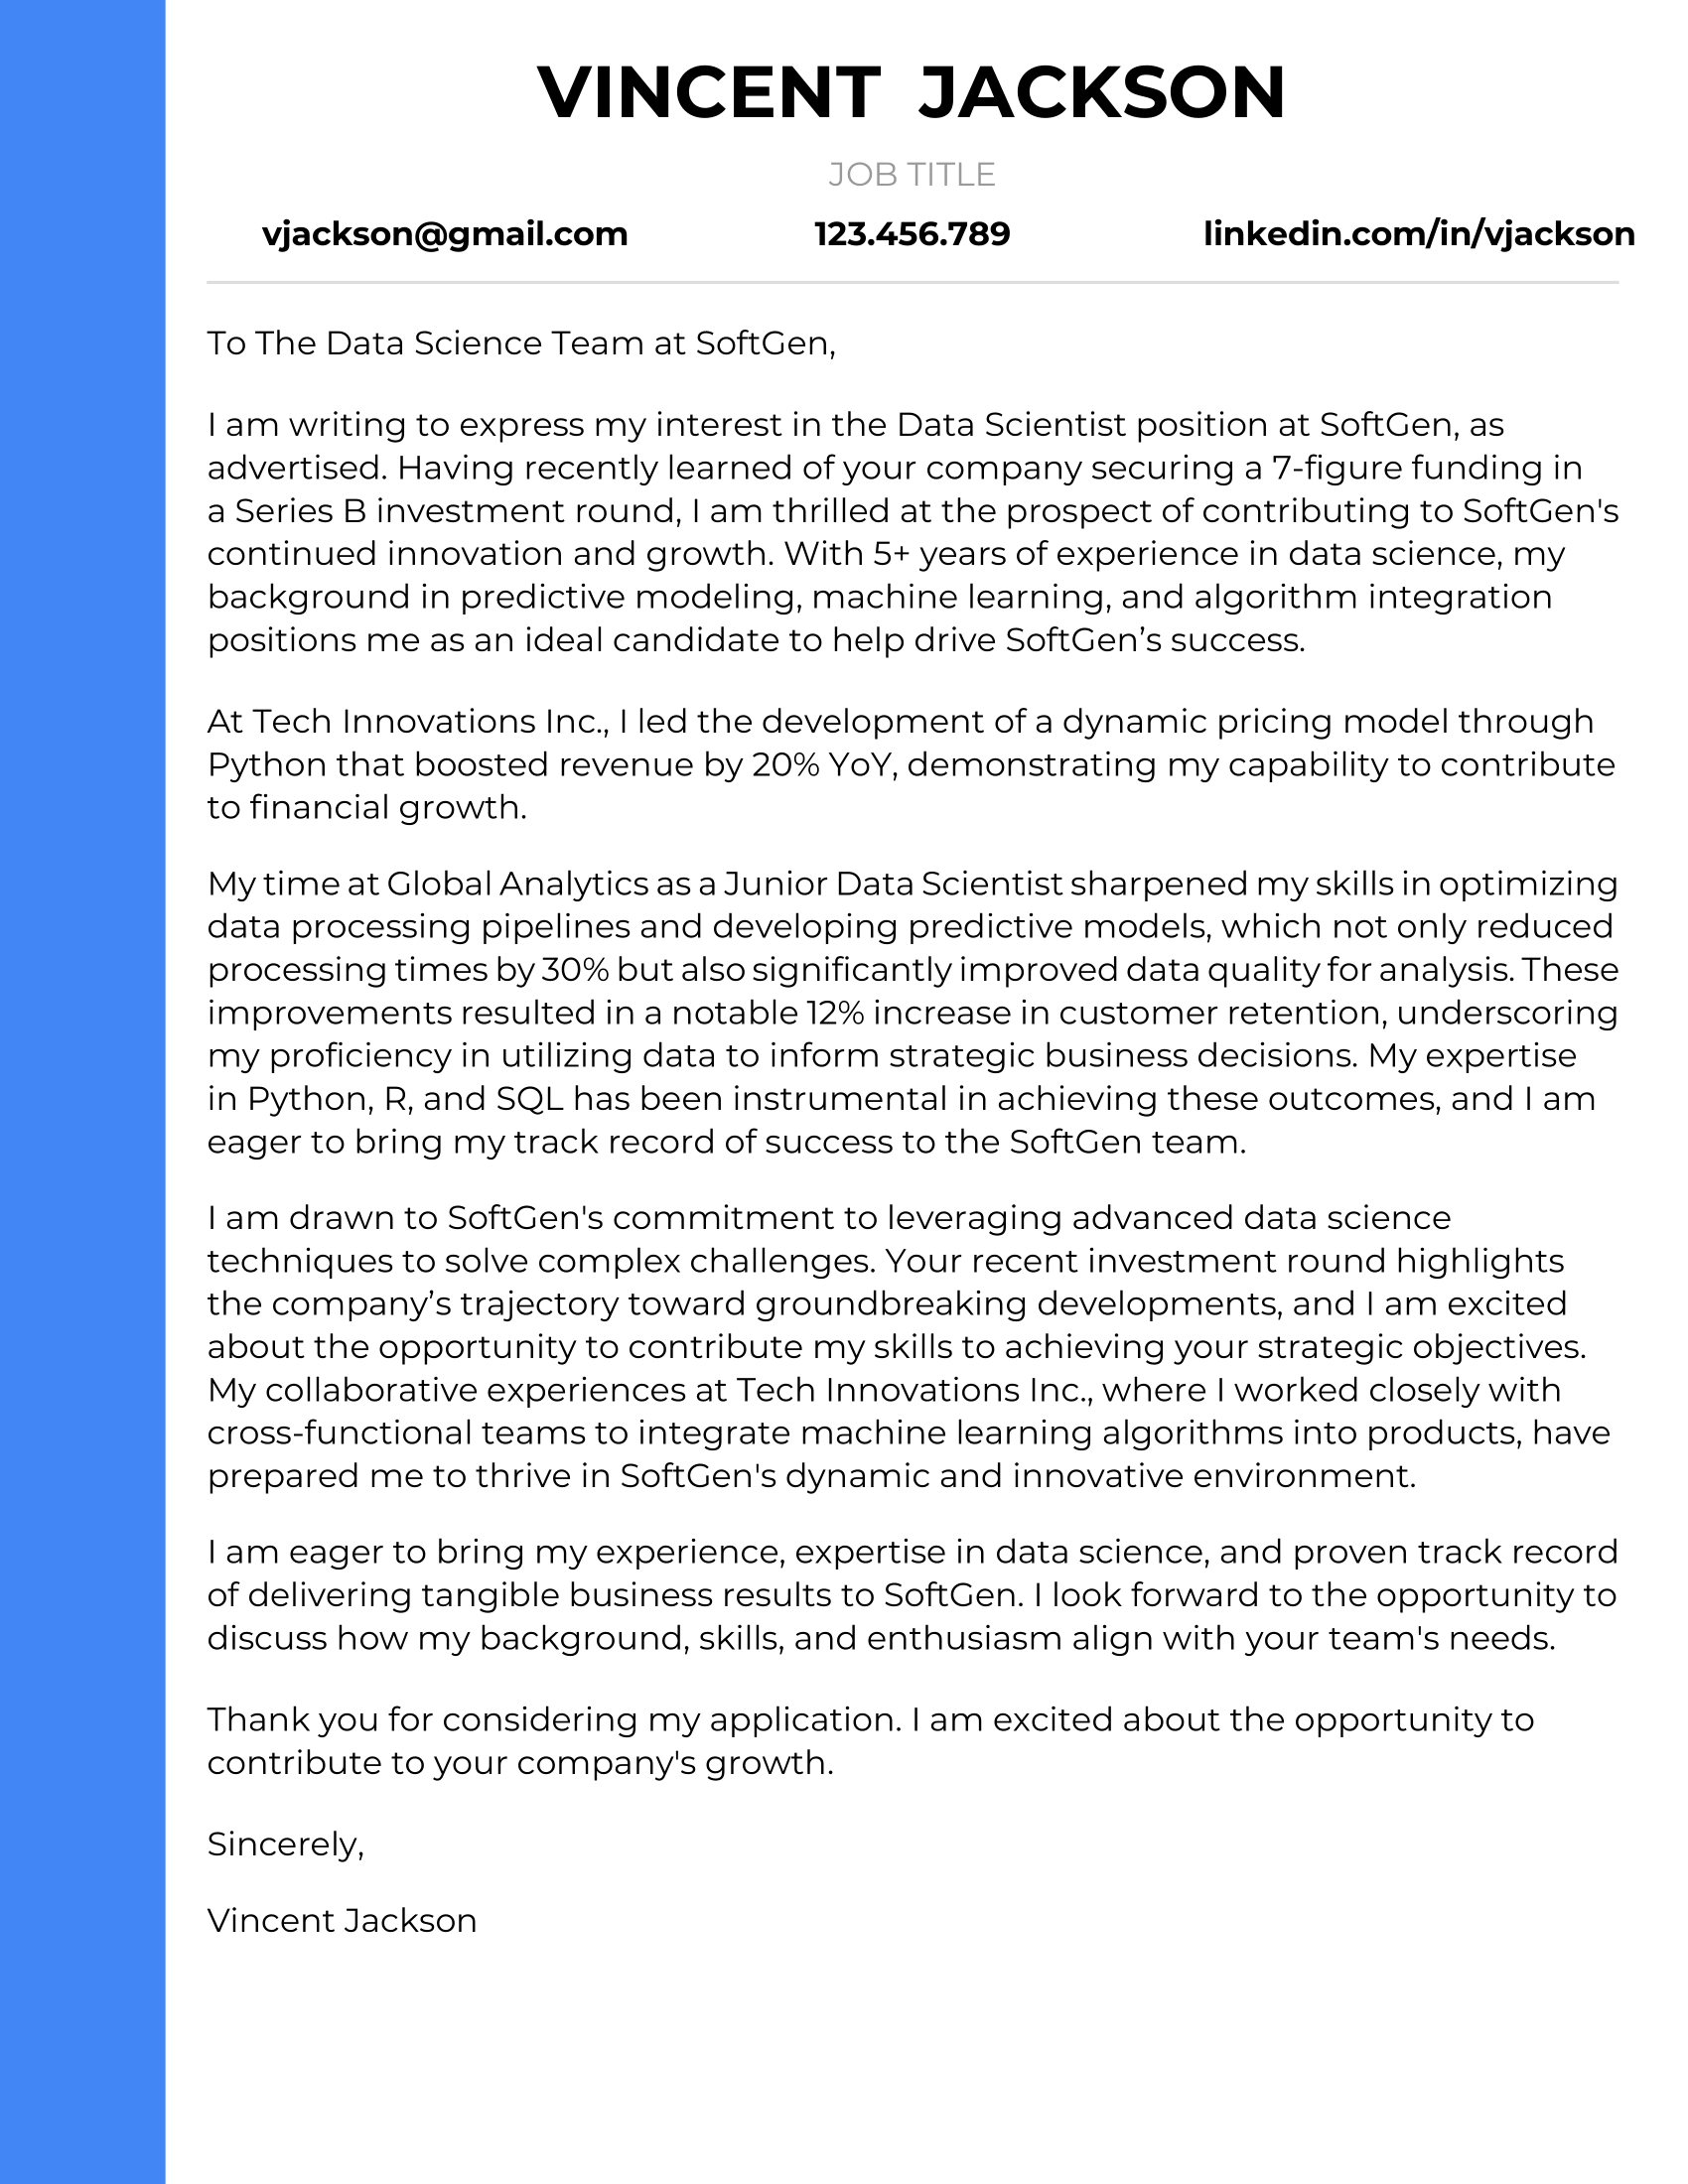 Data Scientist Cover Letter Example #1 - Traditional